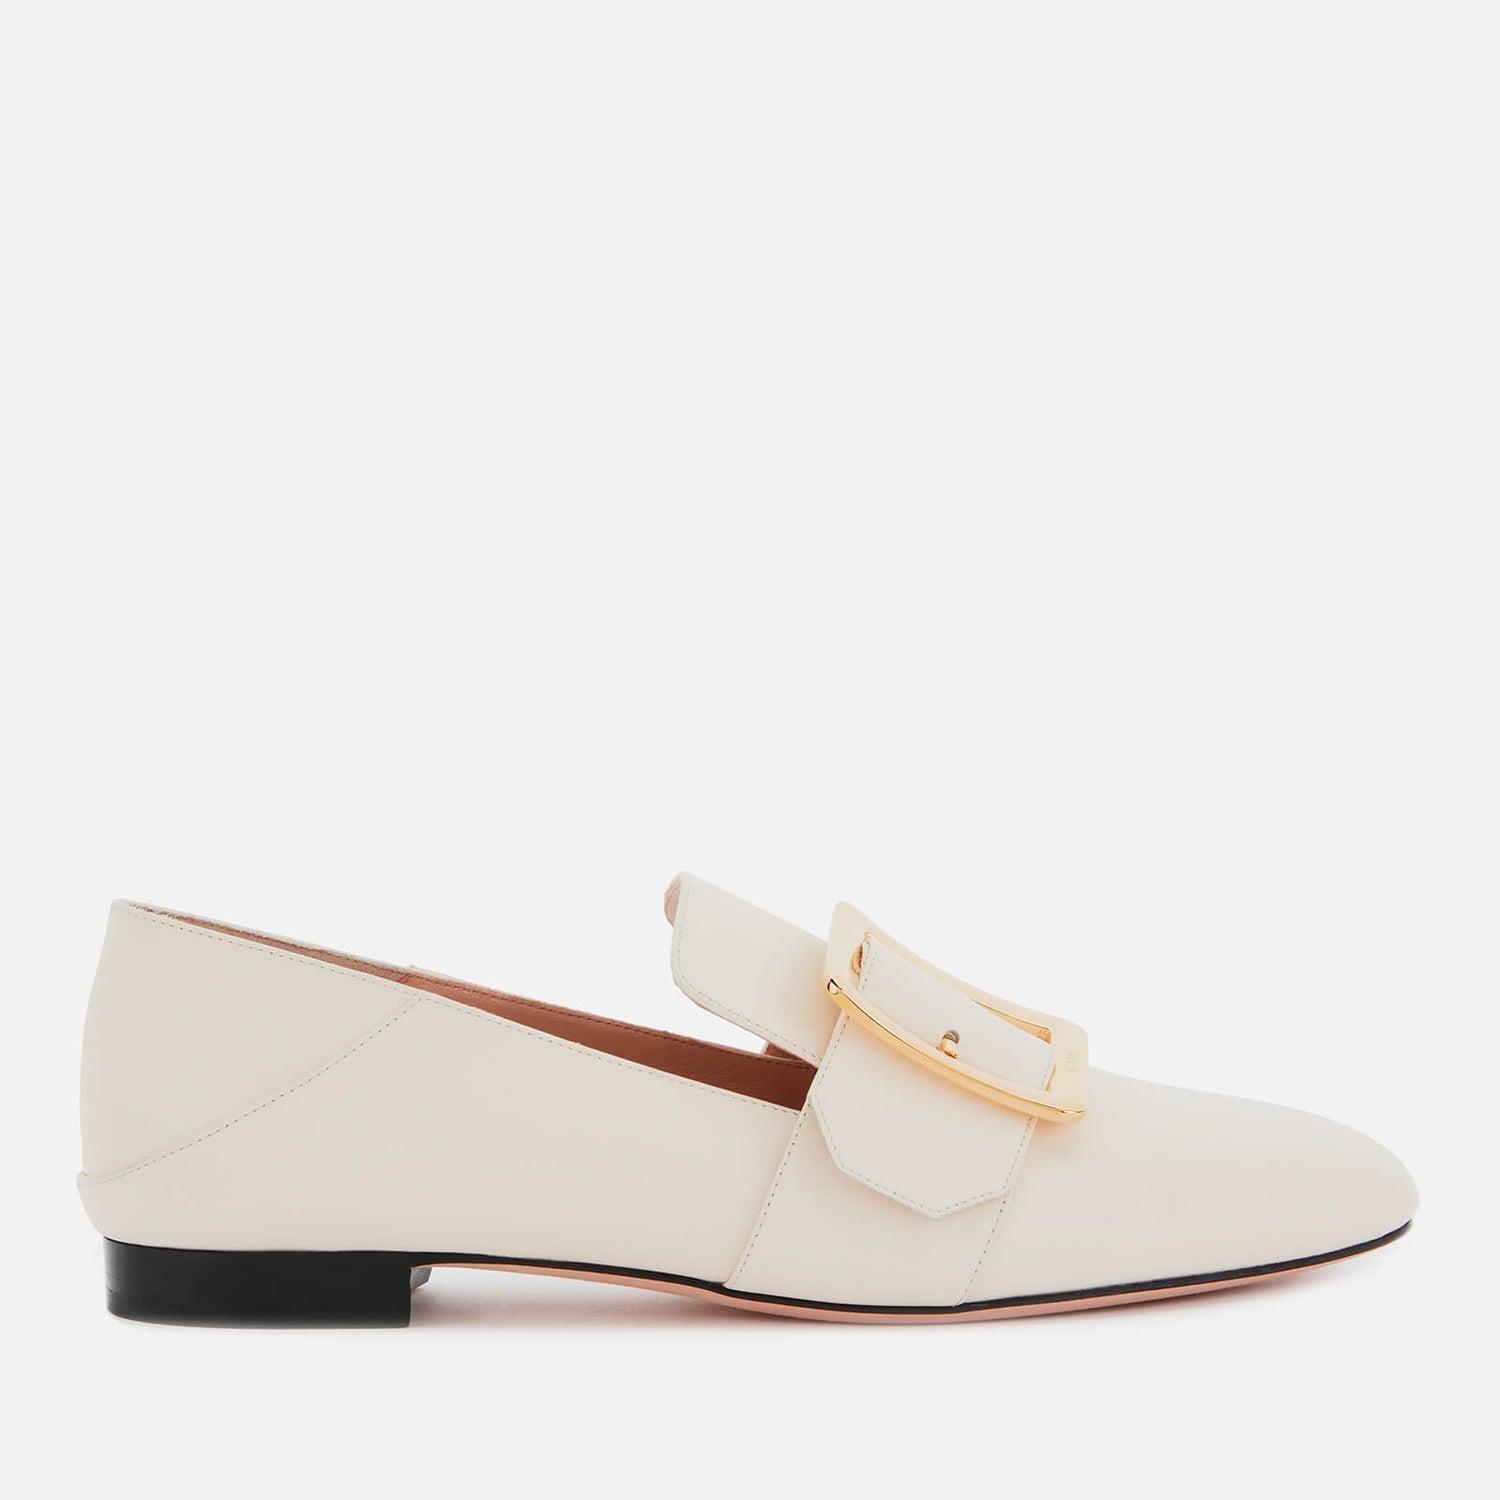 Bally Women's Janelle Leather Loafers - Bone - Free UK Delivery Available